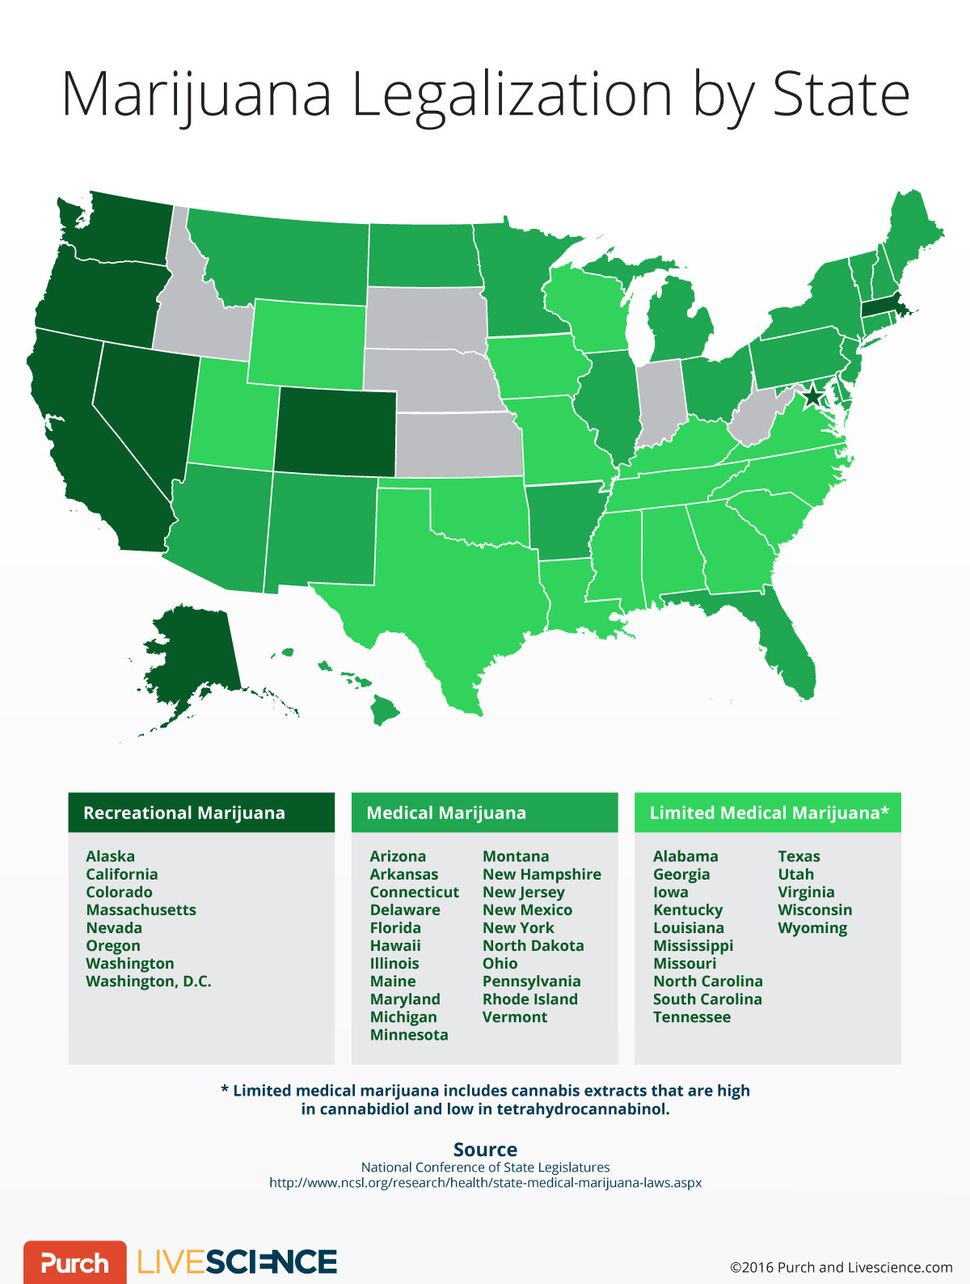 3 More States Legalize Recreational Use of Marijuana How the Map Looks